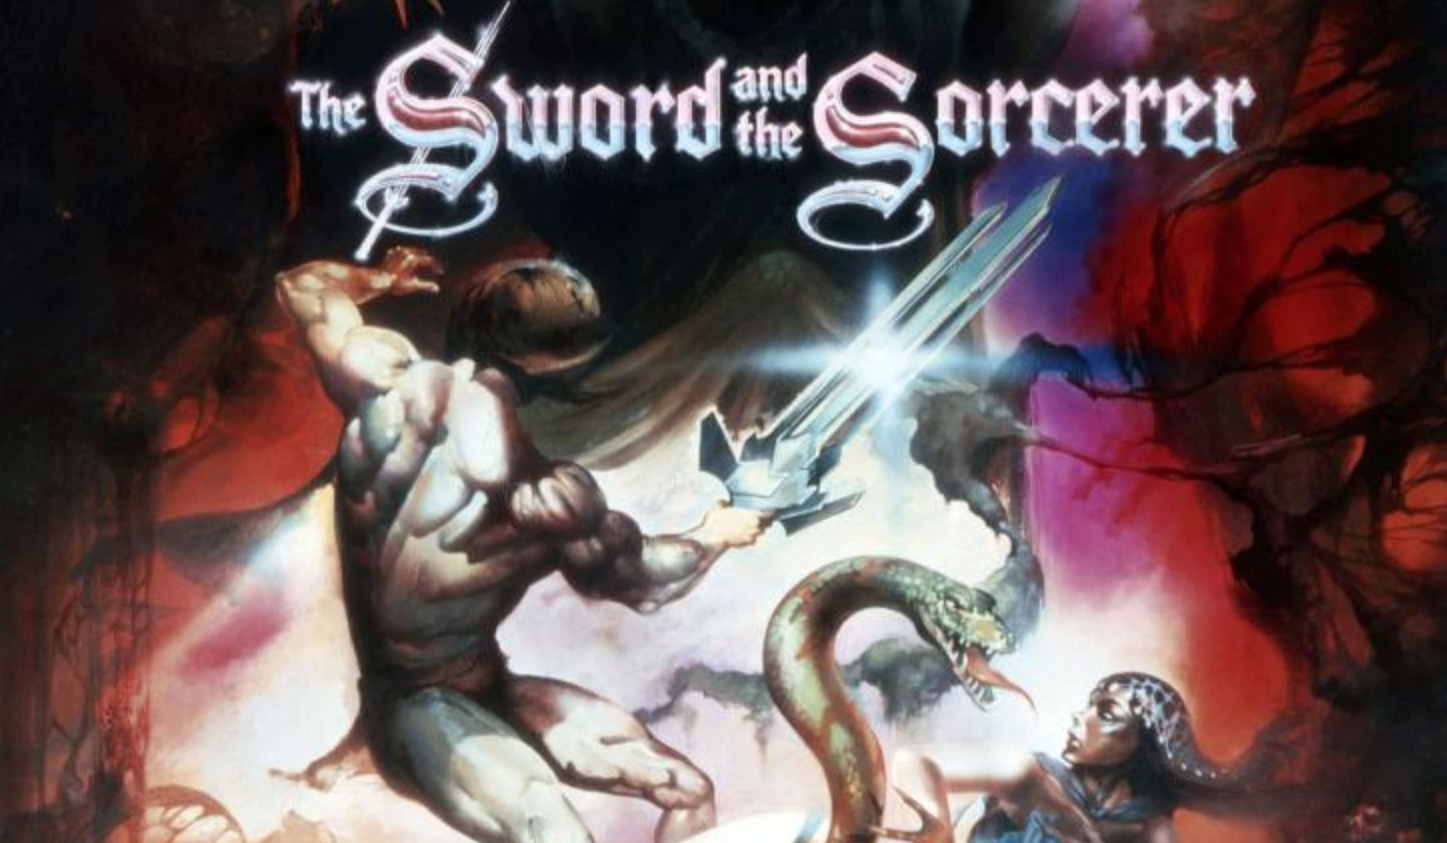 the sword and the sorcerer